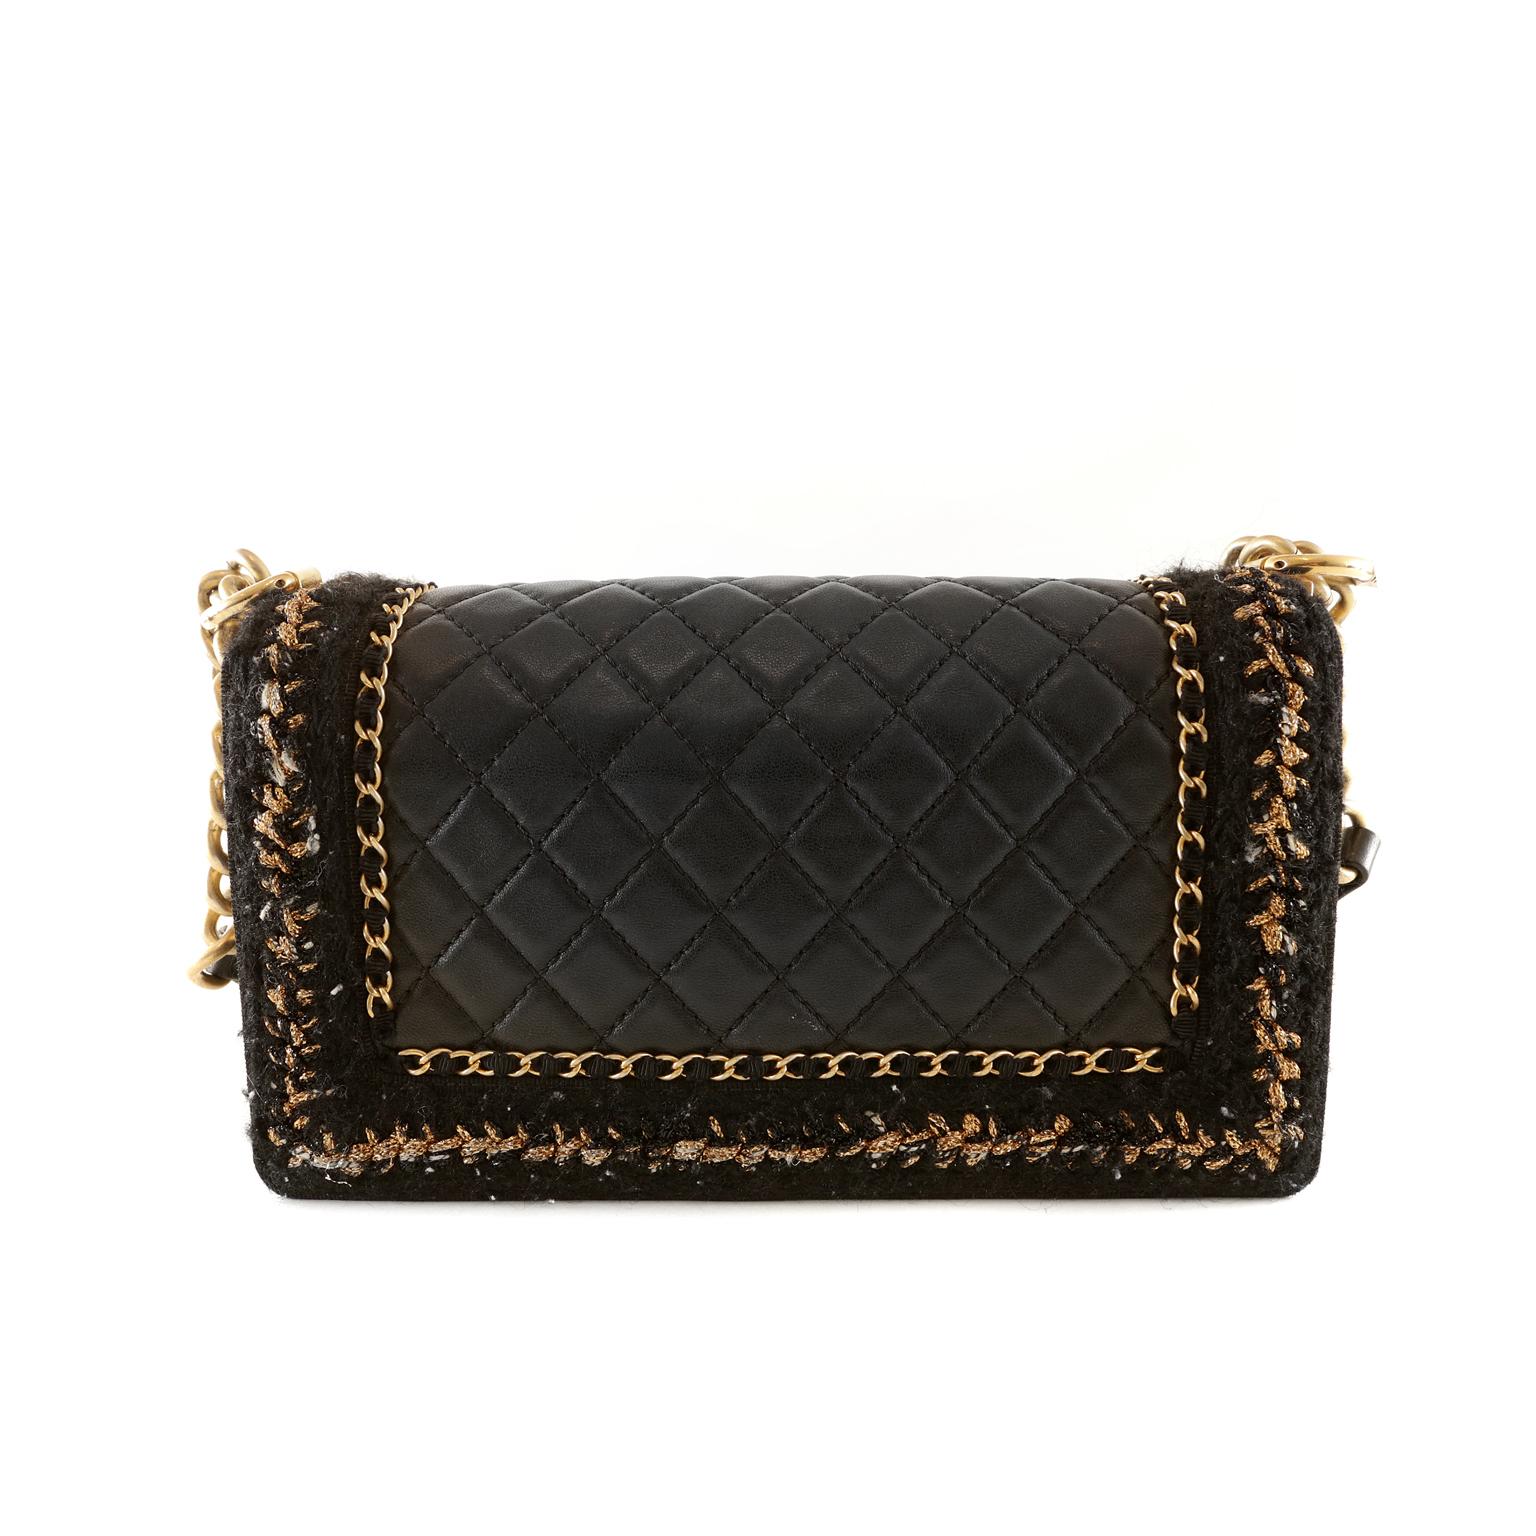 Chanel Black Boucle Chain Boy Bag- pristine; never before carried
The updated design is structured and edgy with a versatility that makes it extremely popular.  The Gold Chain version takes details a step further with elegant ribbon and chain